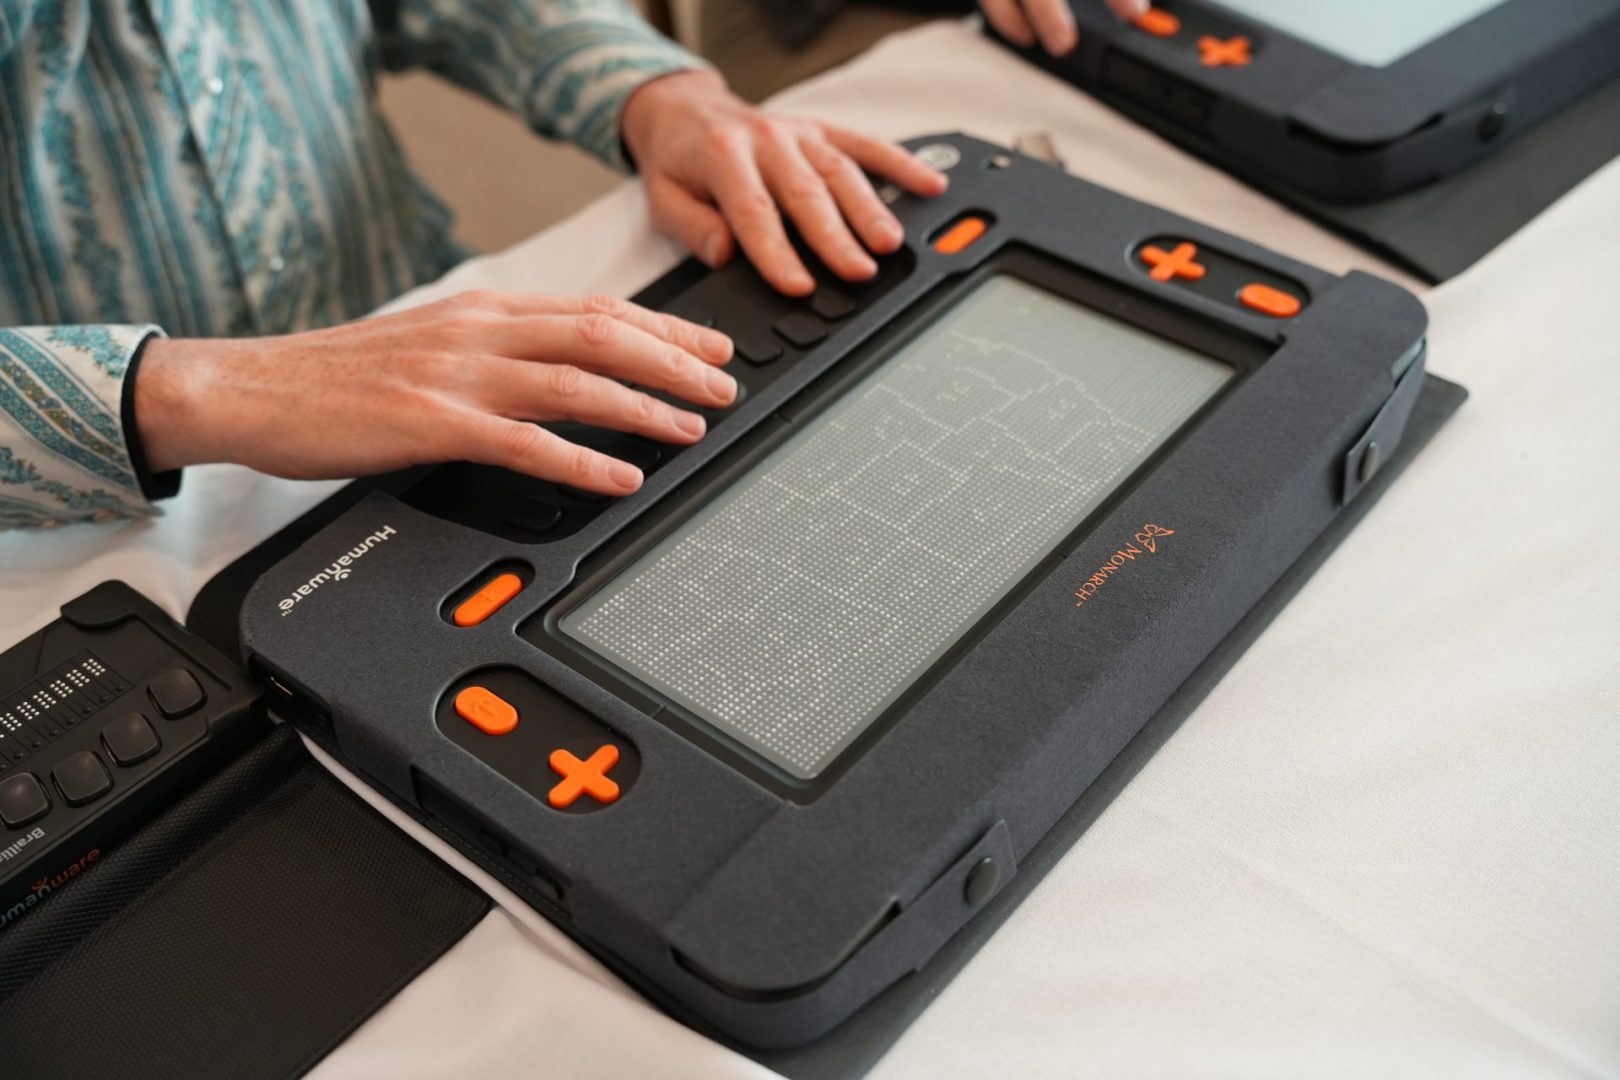 Two hands use the Monarch's Perkins-style keyboard while a tactile graphic depicting a map of the United States is displayed on the Monarch’s multiline refreshable braille display.